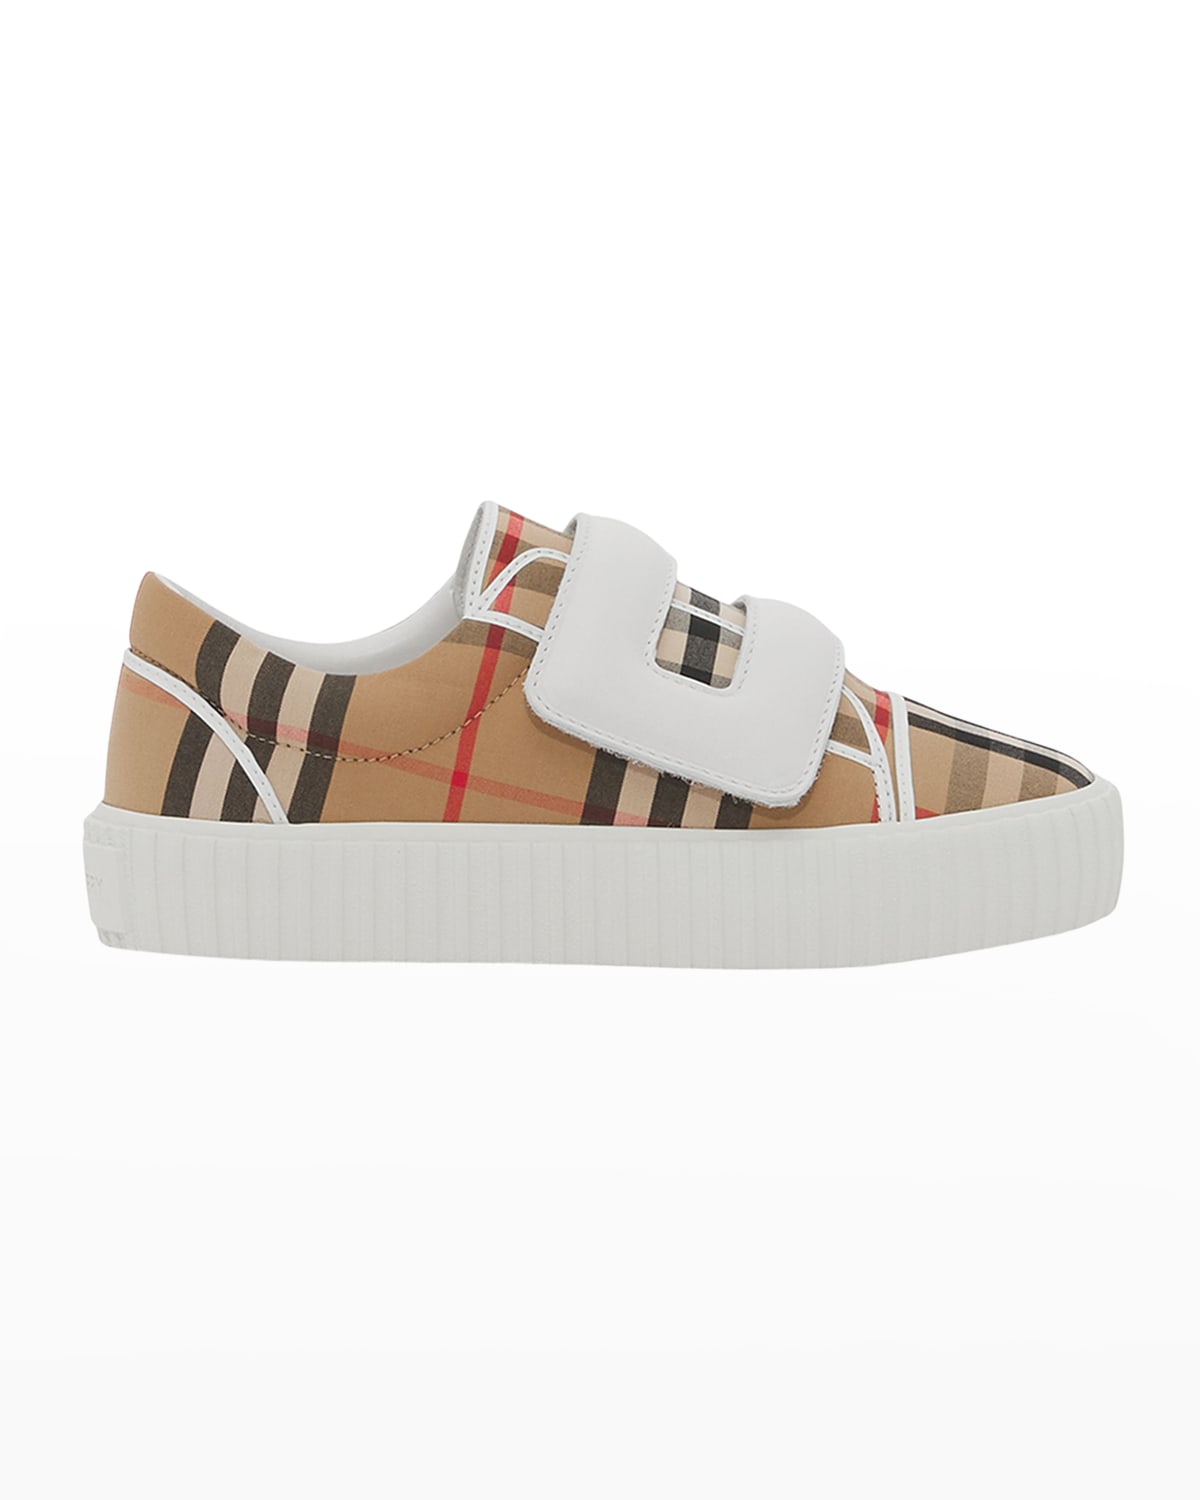 Burberry Mark Check Canvas Sneakers, Baby/Toddlers | Marcus